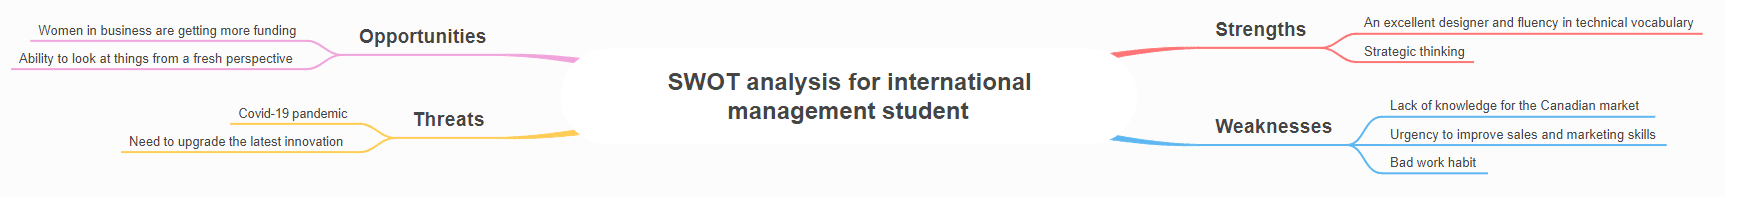 SWOT analysis for international business management student